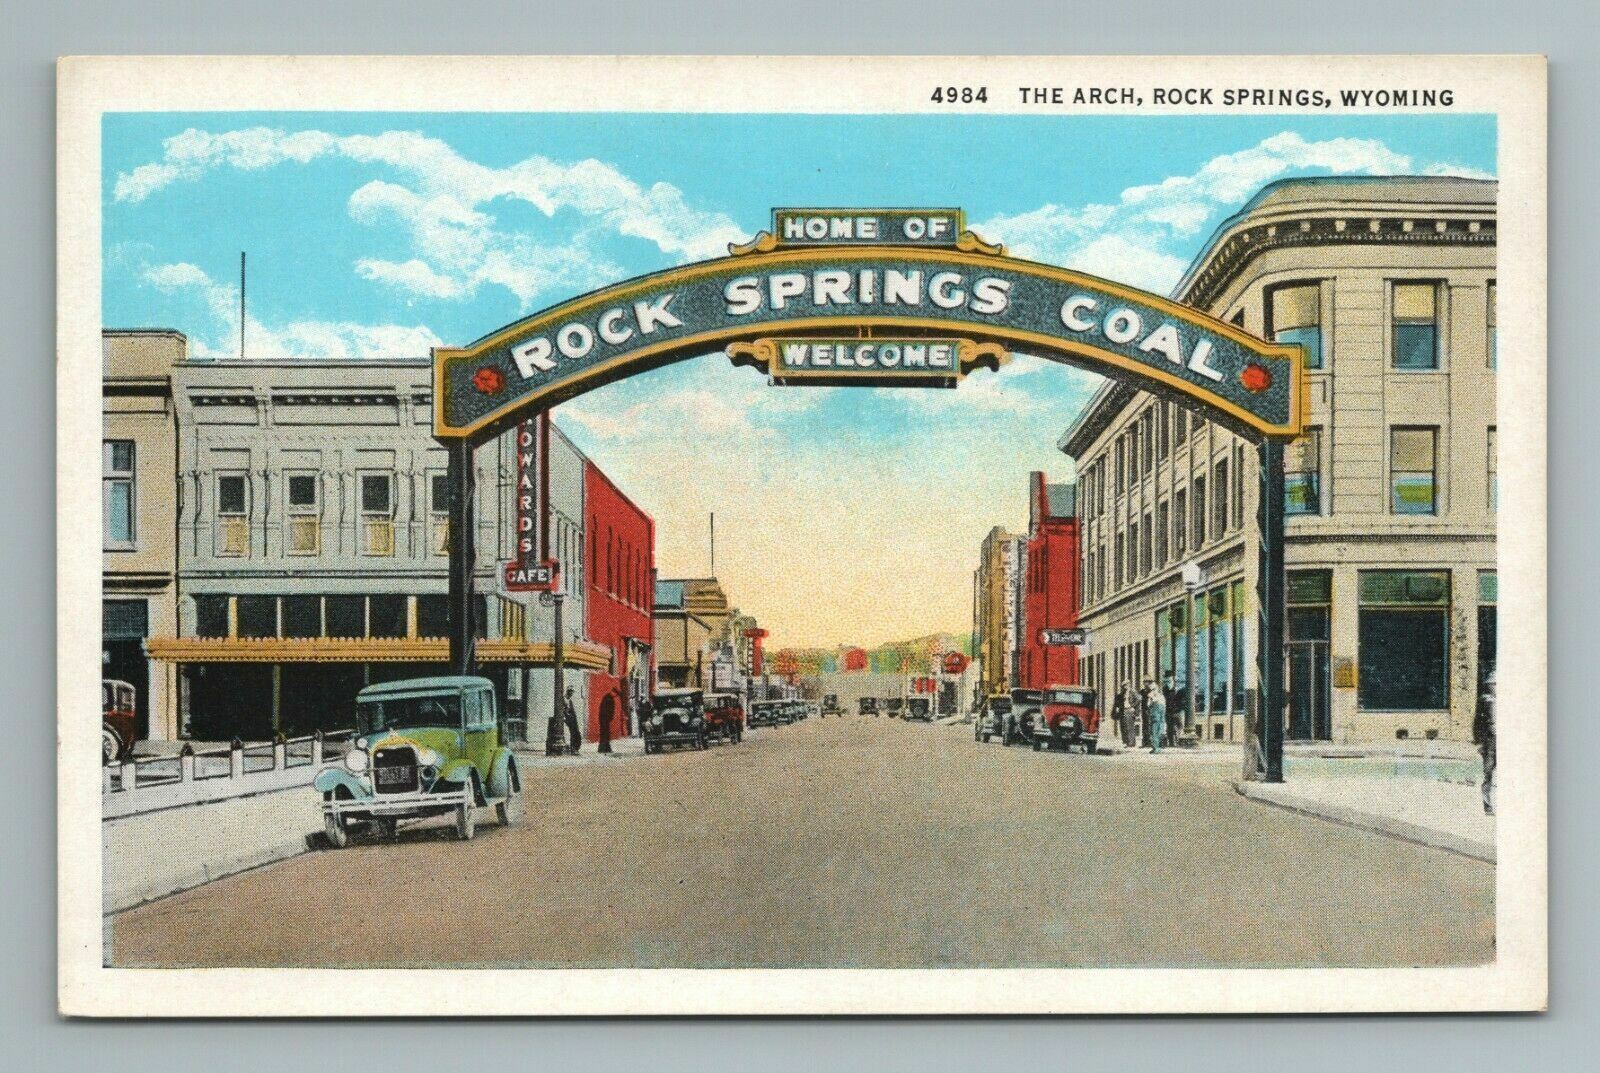 The Arch Rock Springs Street Cars Wyoming Postcard